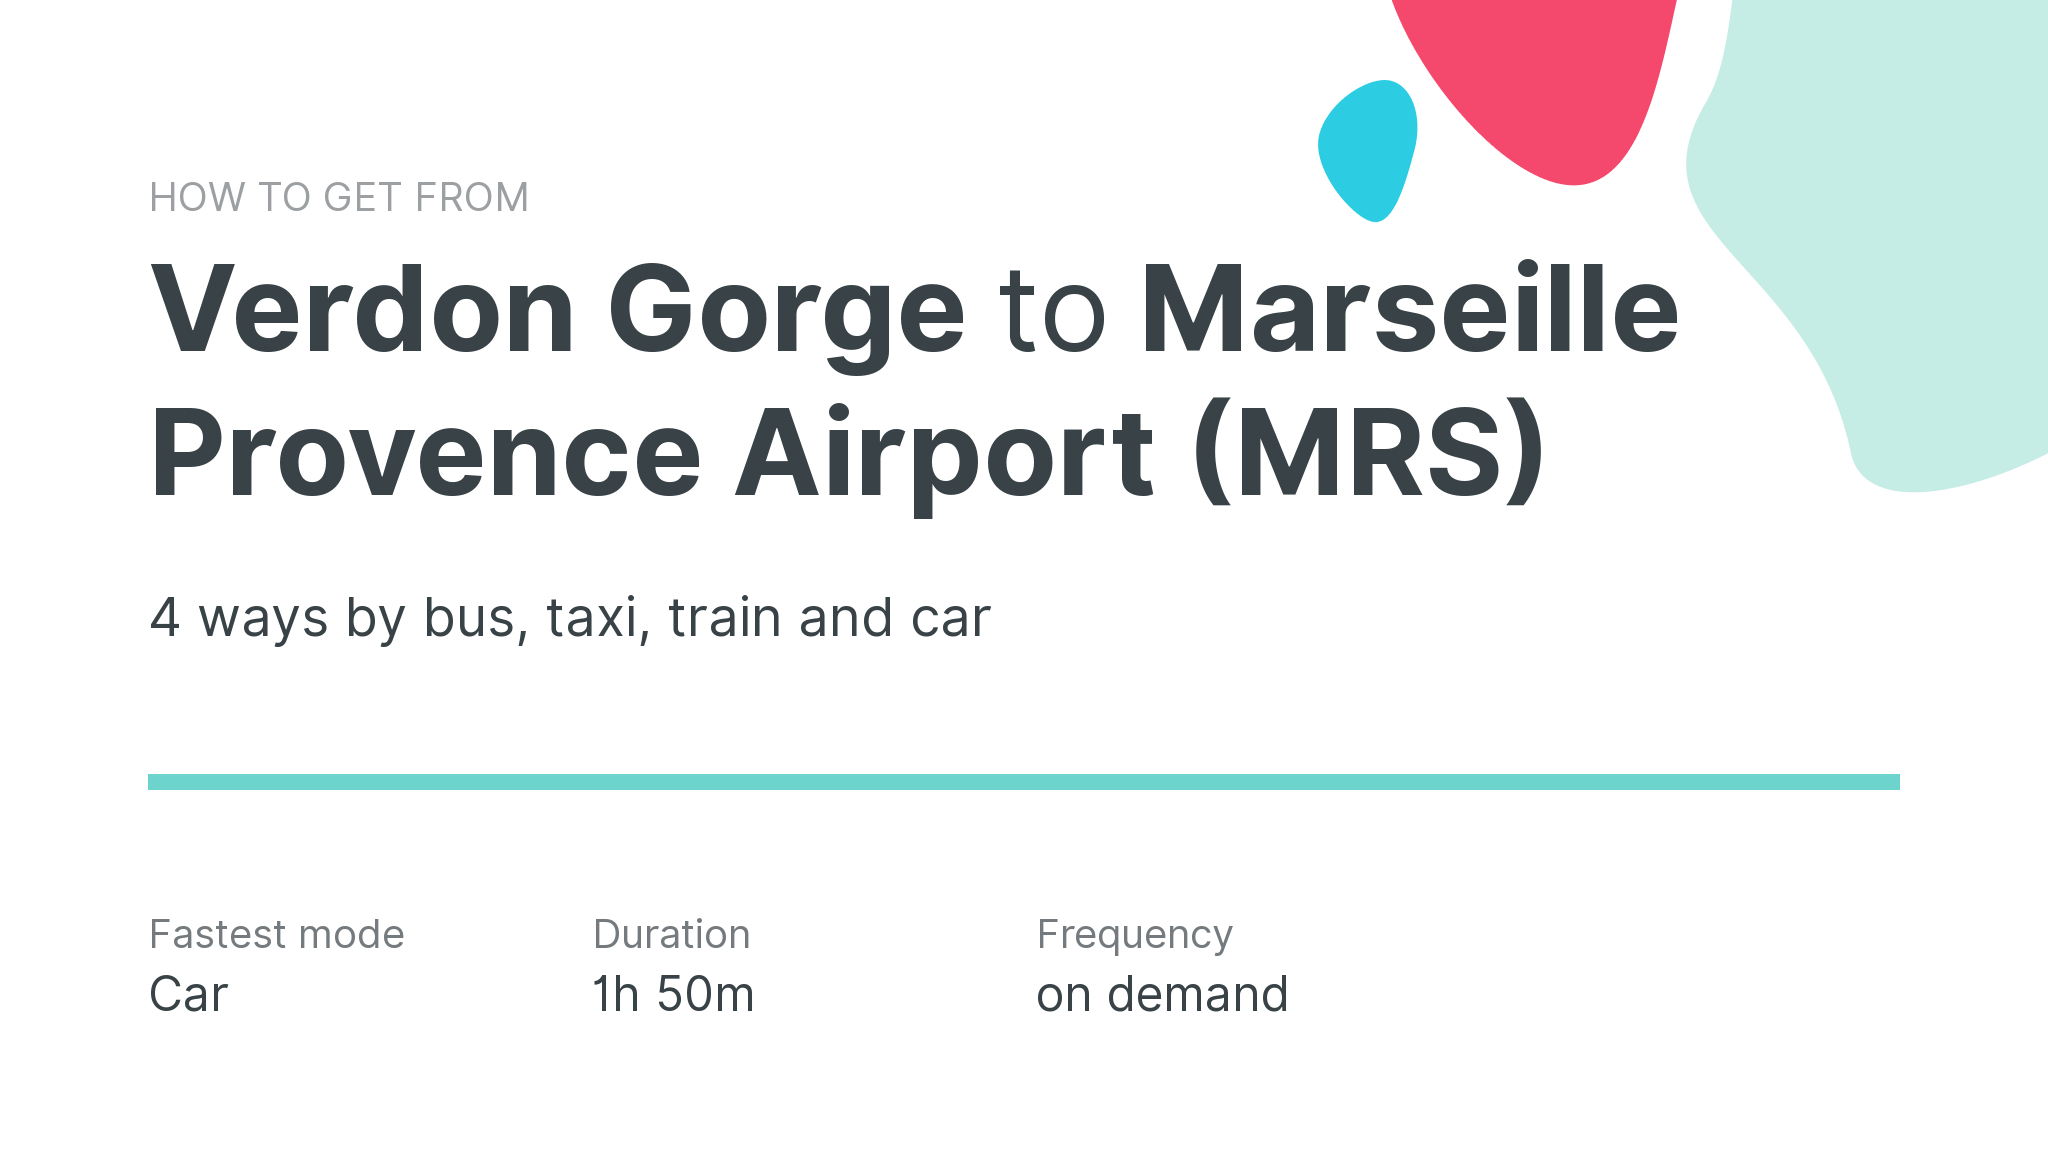 How do I get from Verdon Gorge to Marseille Provence Airport (MRS)